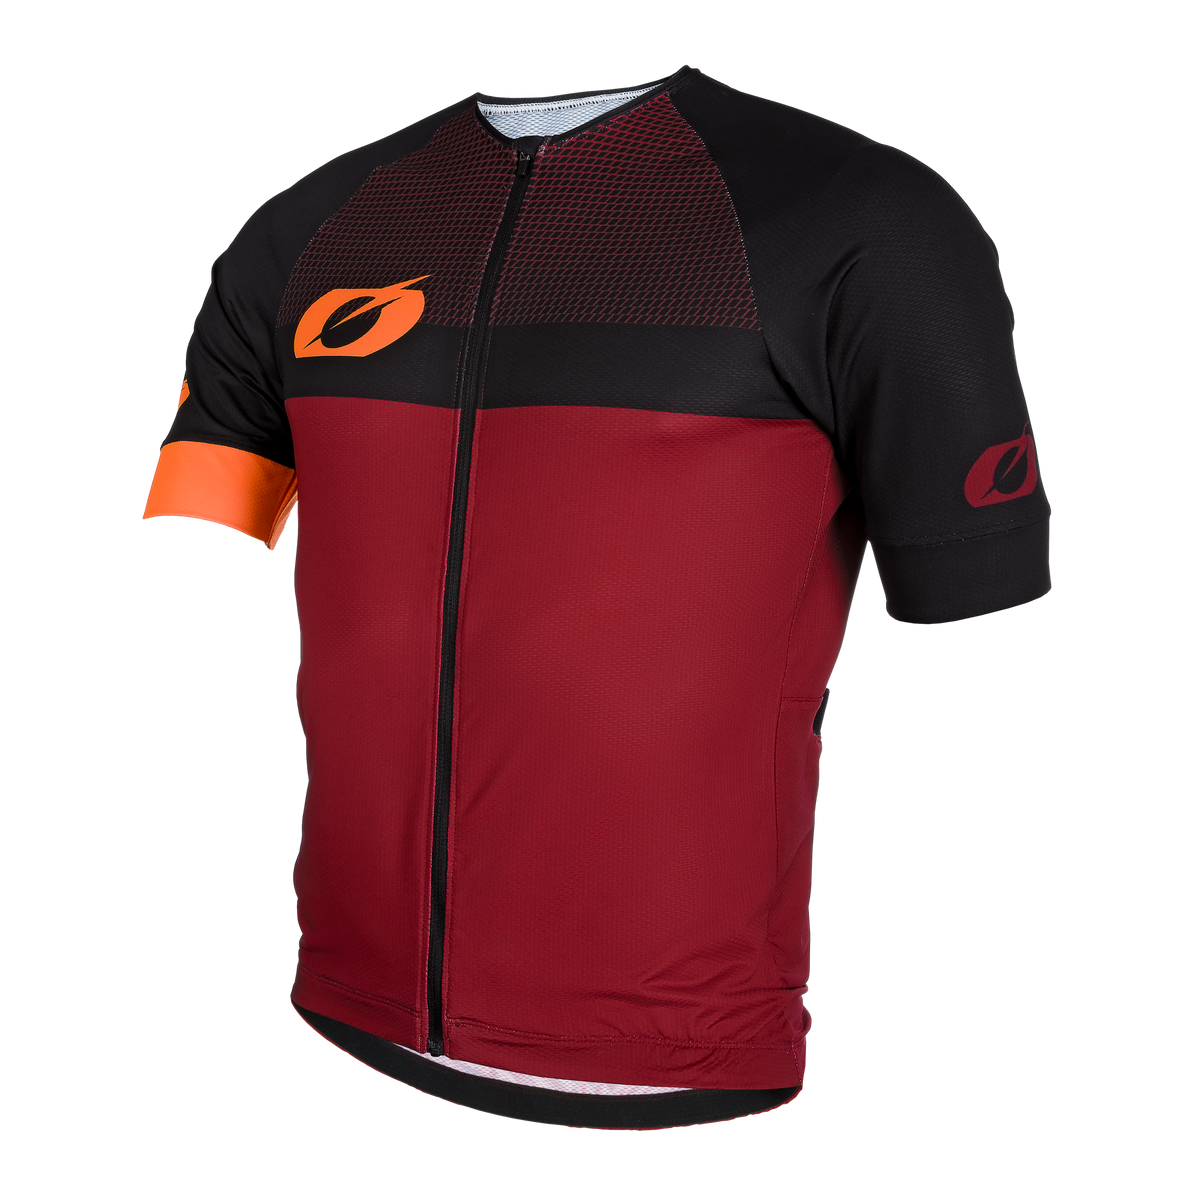 https://cdn.oneal.eu/assets/importedProductImages/CLOTHING/MTB/AERIAL/SPLIT/red_orange/2021_ONeal_AERIAL_Jersey_SPLIT_red_orange_front.png